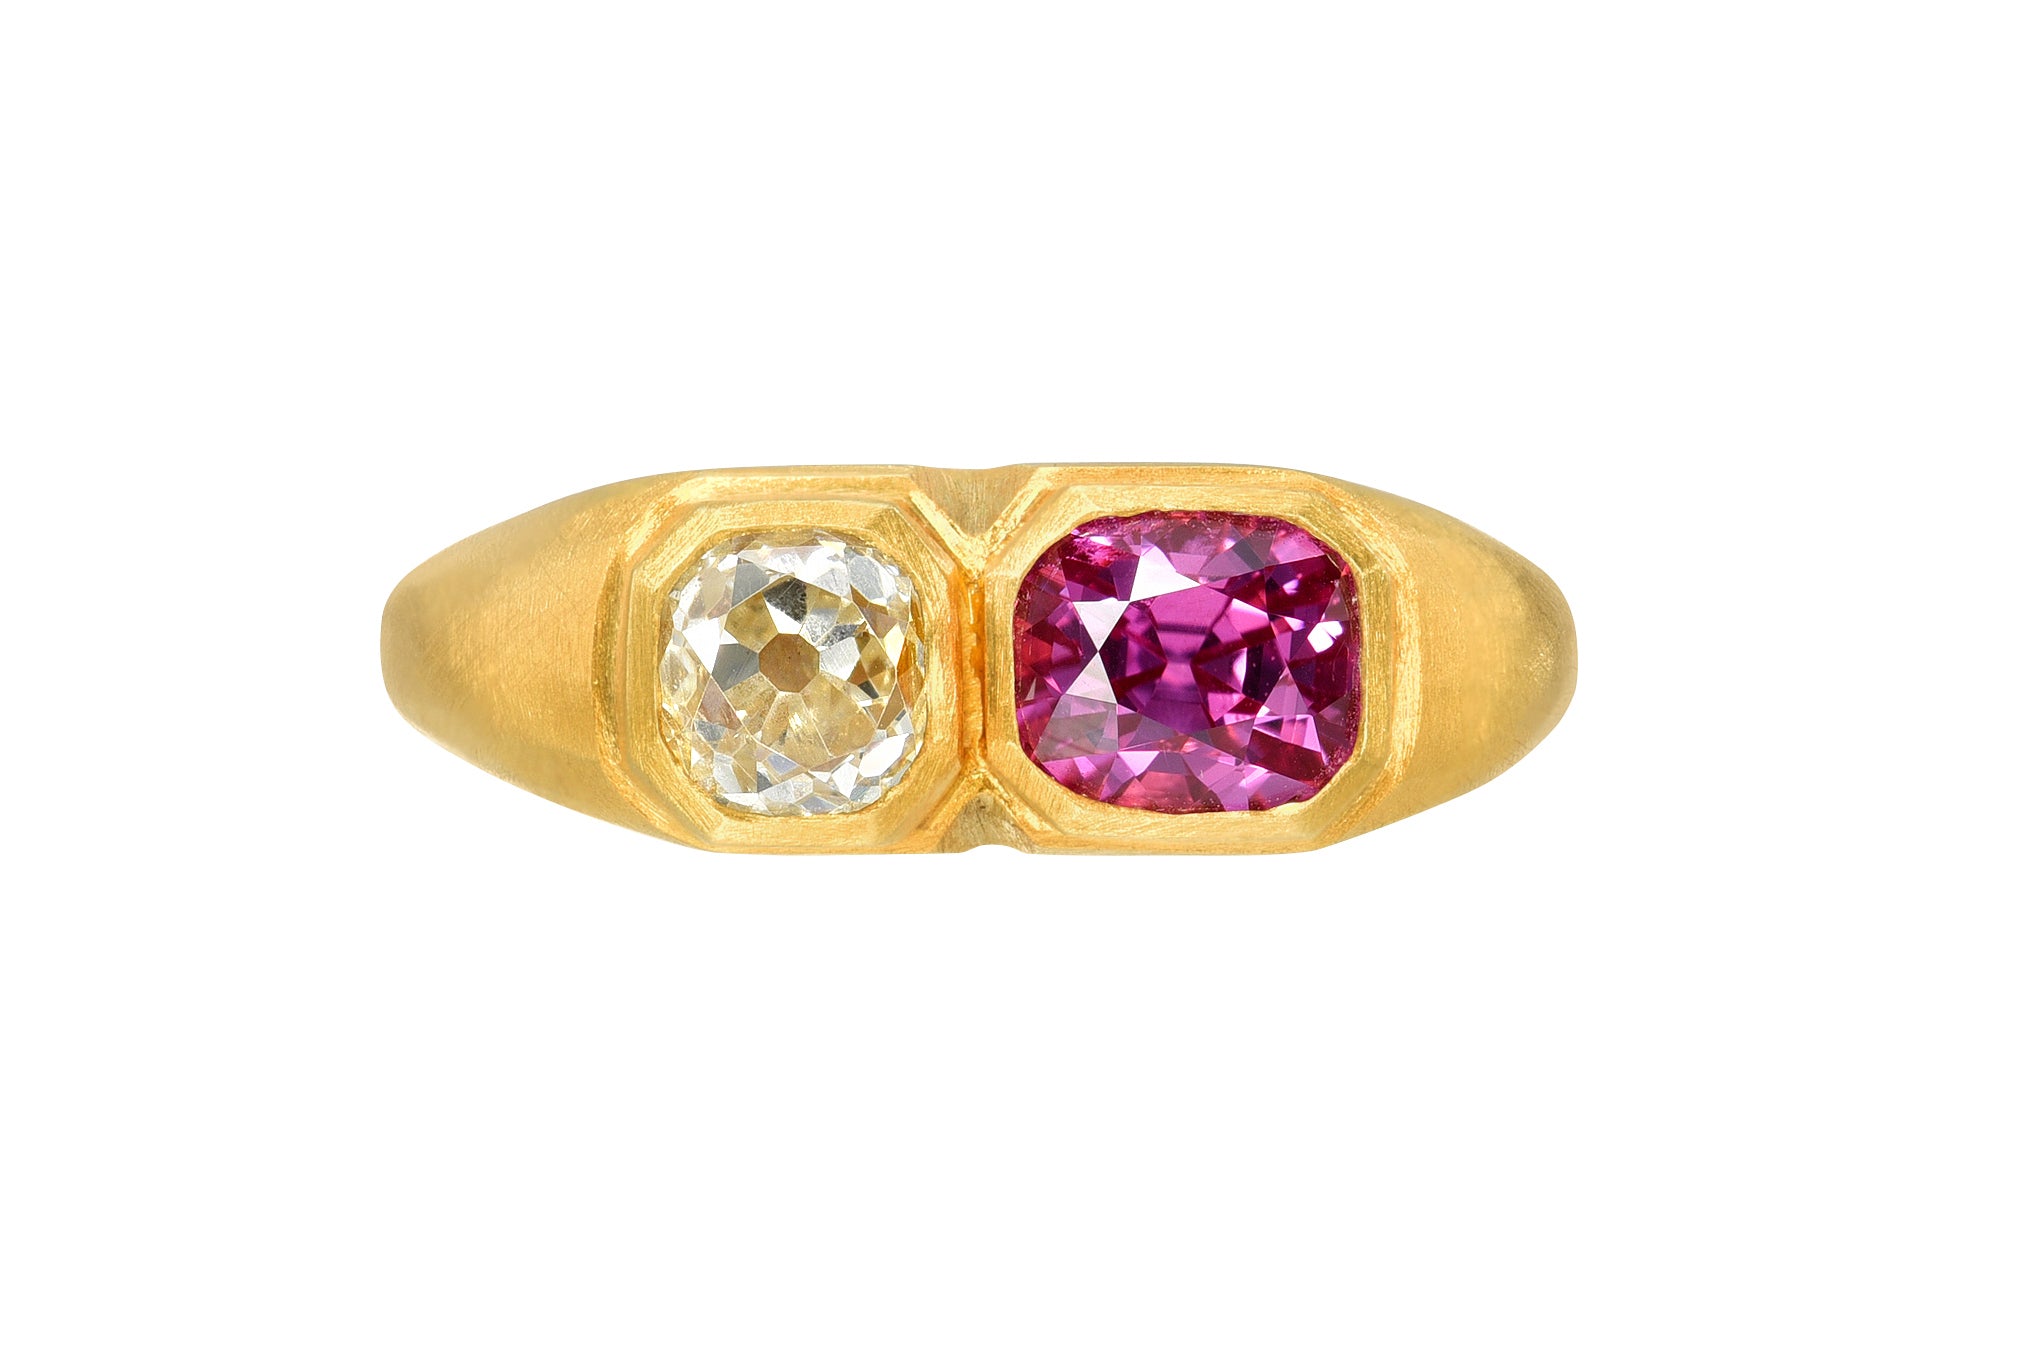 Darius Jewels one of a kind double pink sapphire & diamond ring